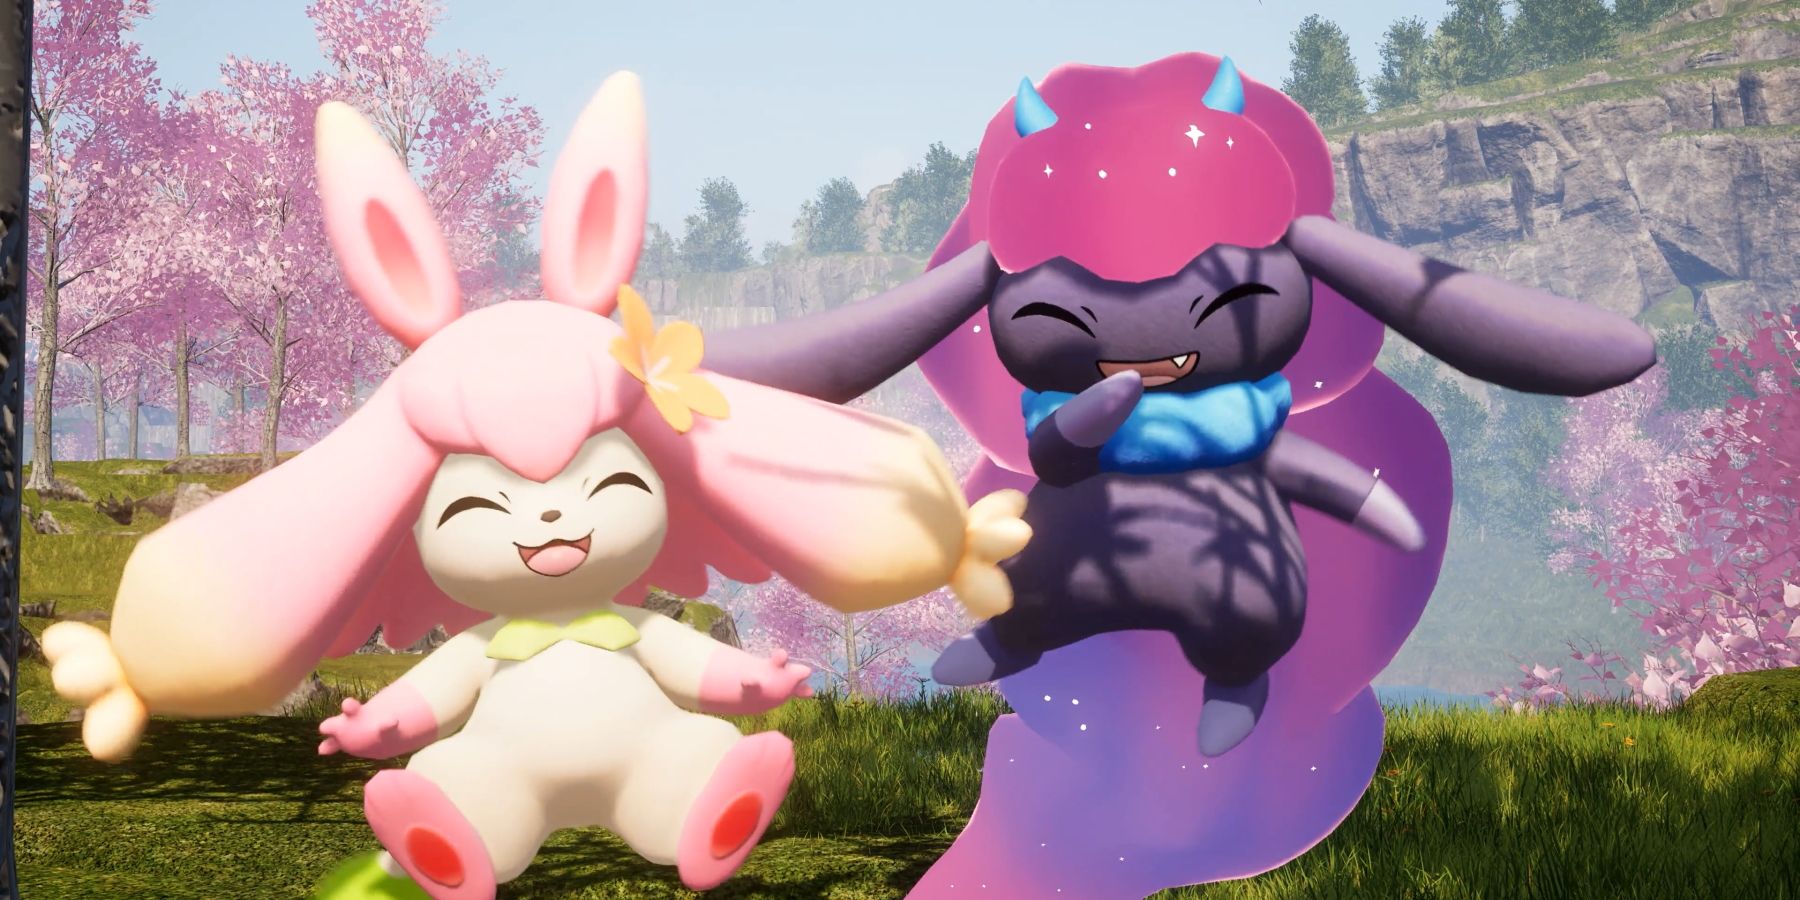 A screenshot from the video game Palworld. Two Pals, Flopie and Daedream, are depicted smiling and laughing